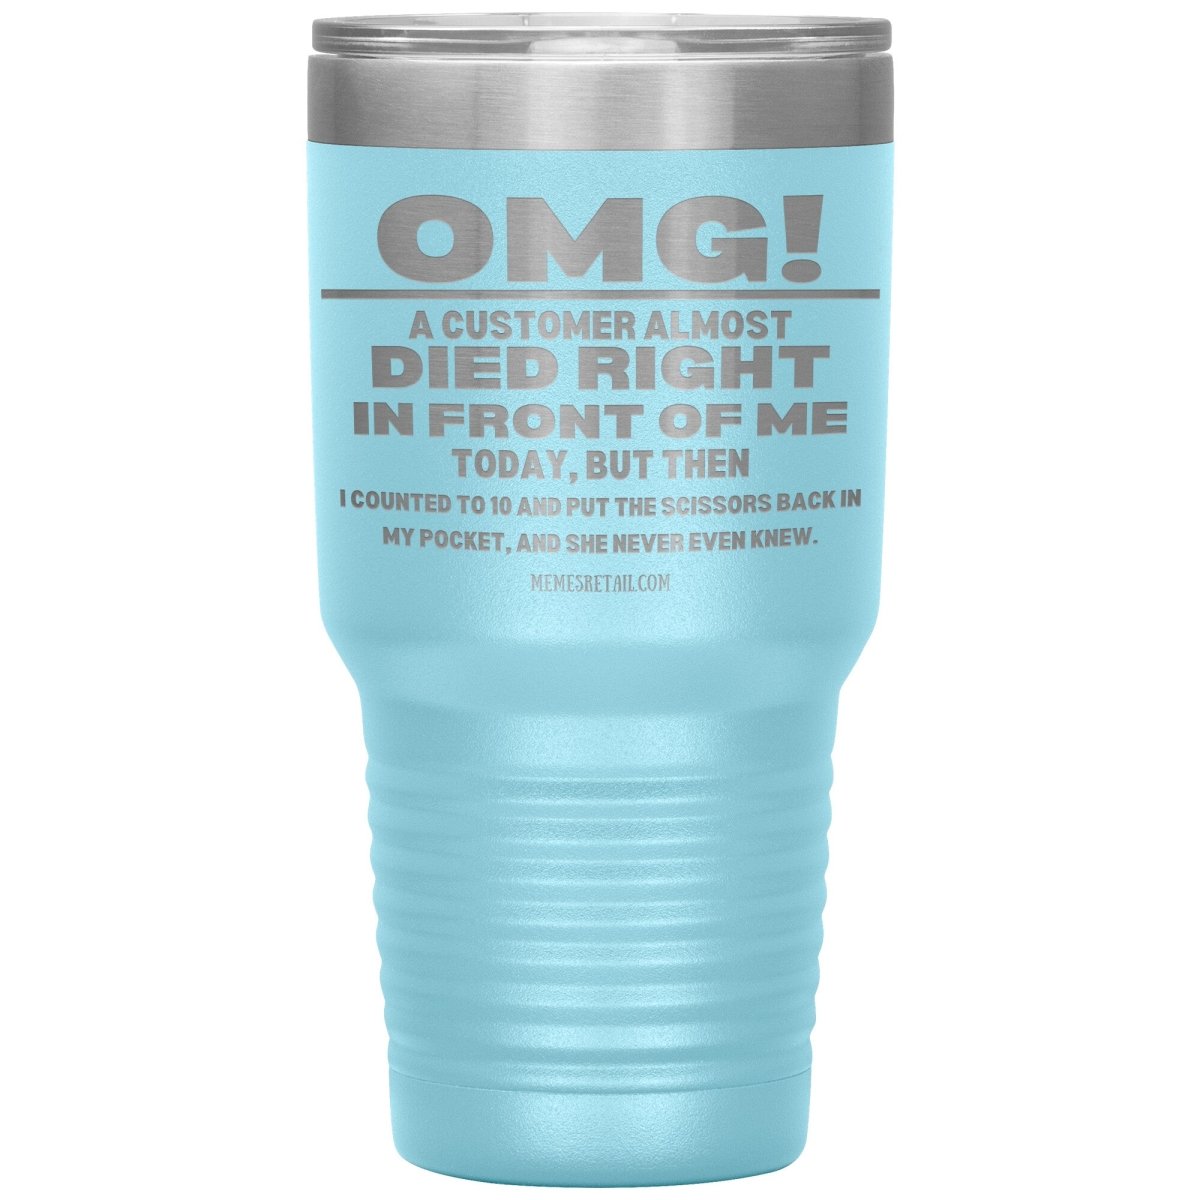 OMG! A Customer Almost Died Right In Front Of Me Tumbler, 30oz Insulated Tumbler / Light Blue - MemesRetail.com